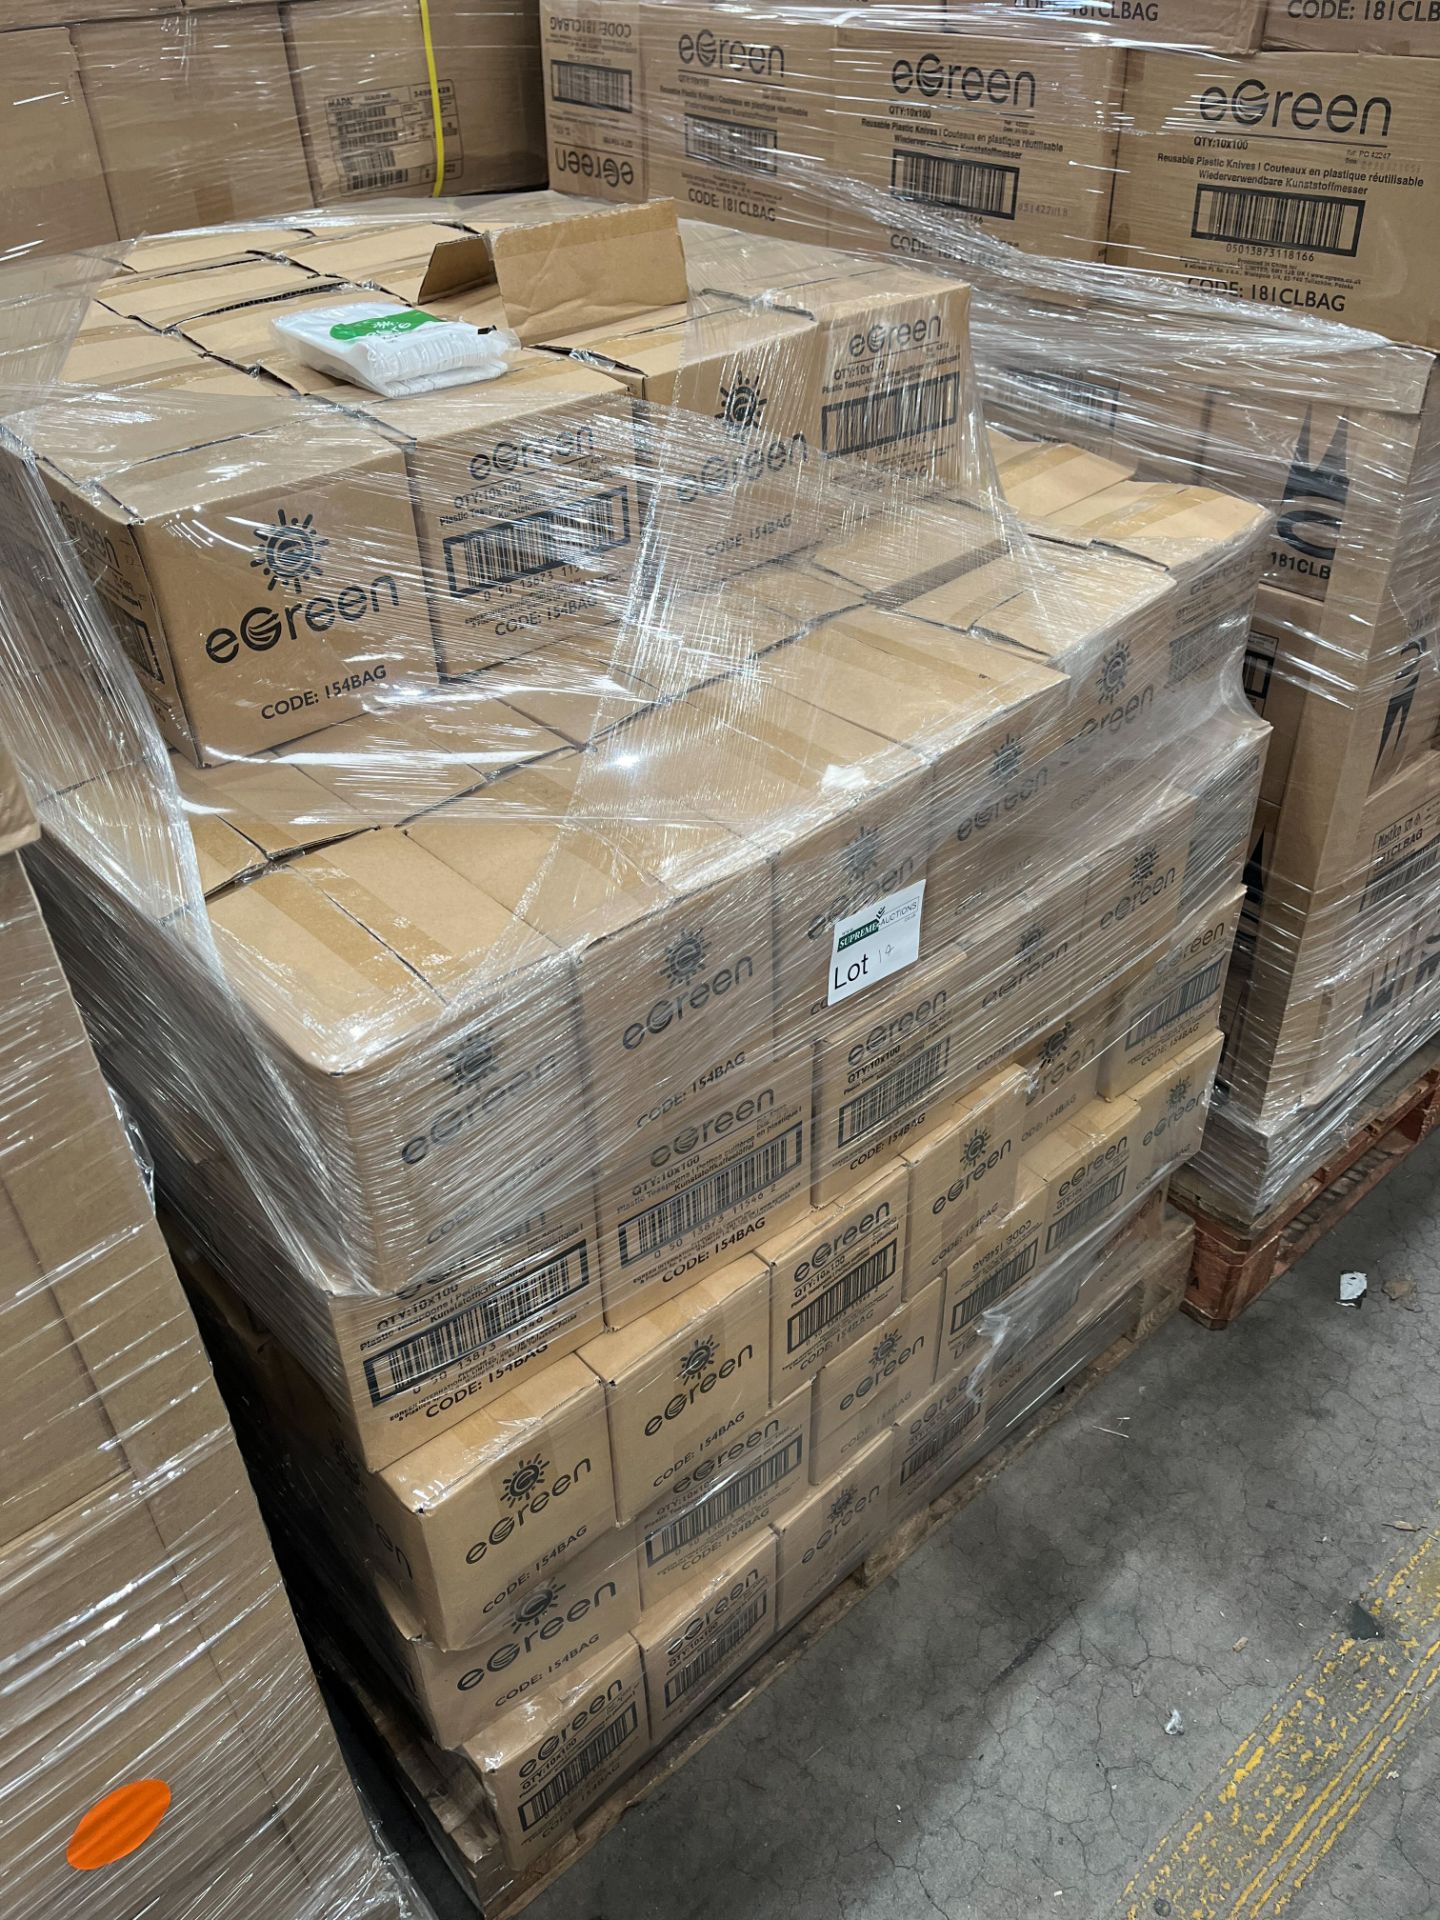 TRADE PALLET TO CONTAIN 2390x BRAND NEW EGREEN Packs Of 100 White Plastic Teaspoons - Image 2 of 2